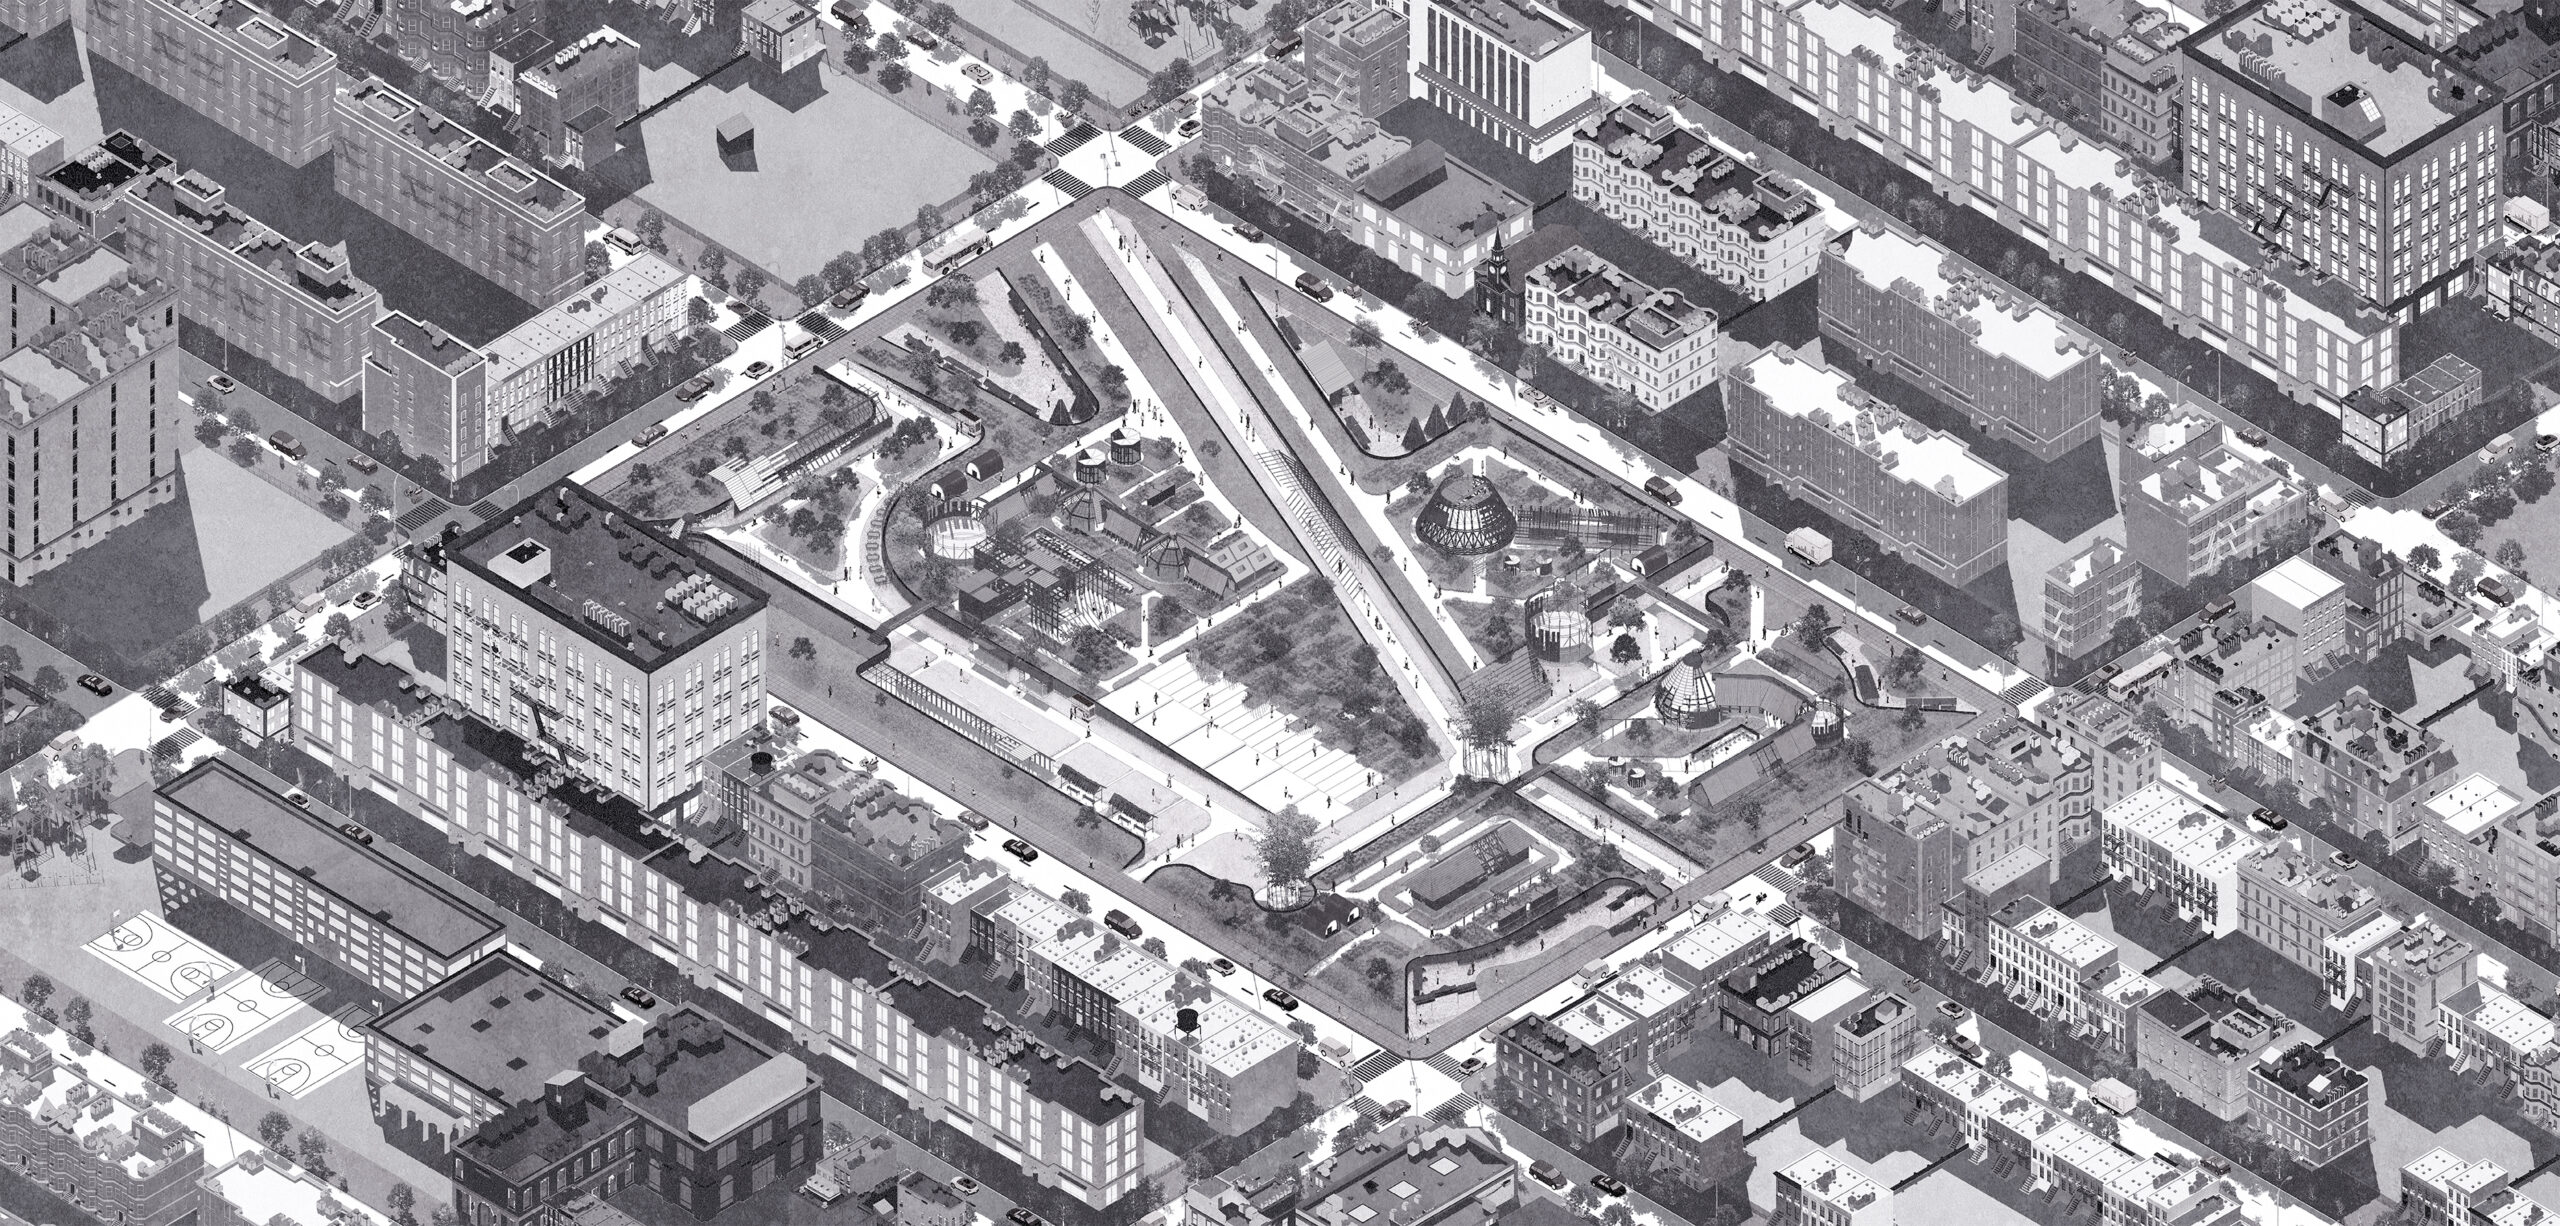 a depiction of a section of a city blocks, from a overhead, tilted viewpoint, populated with buildings, streets, and railroad tracks